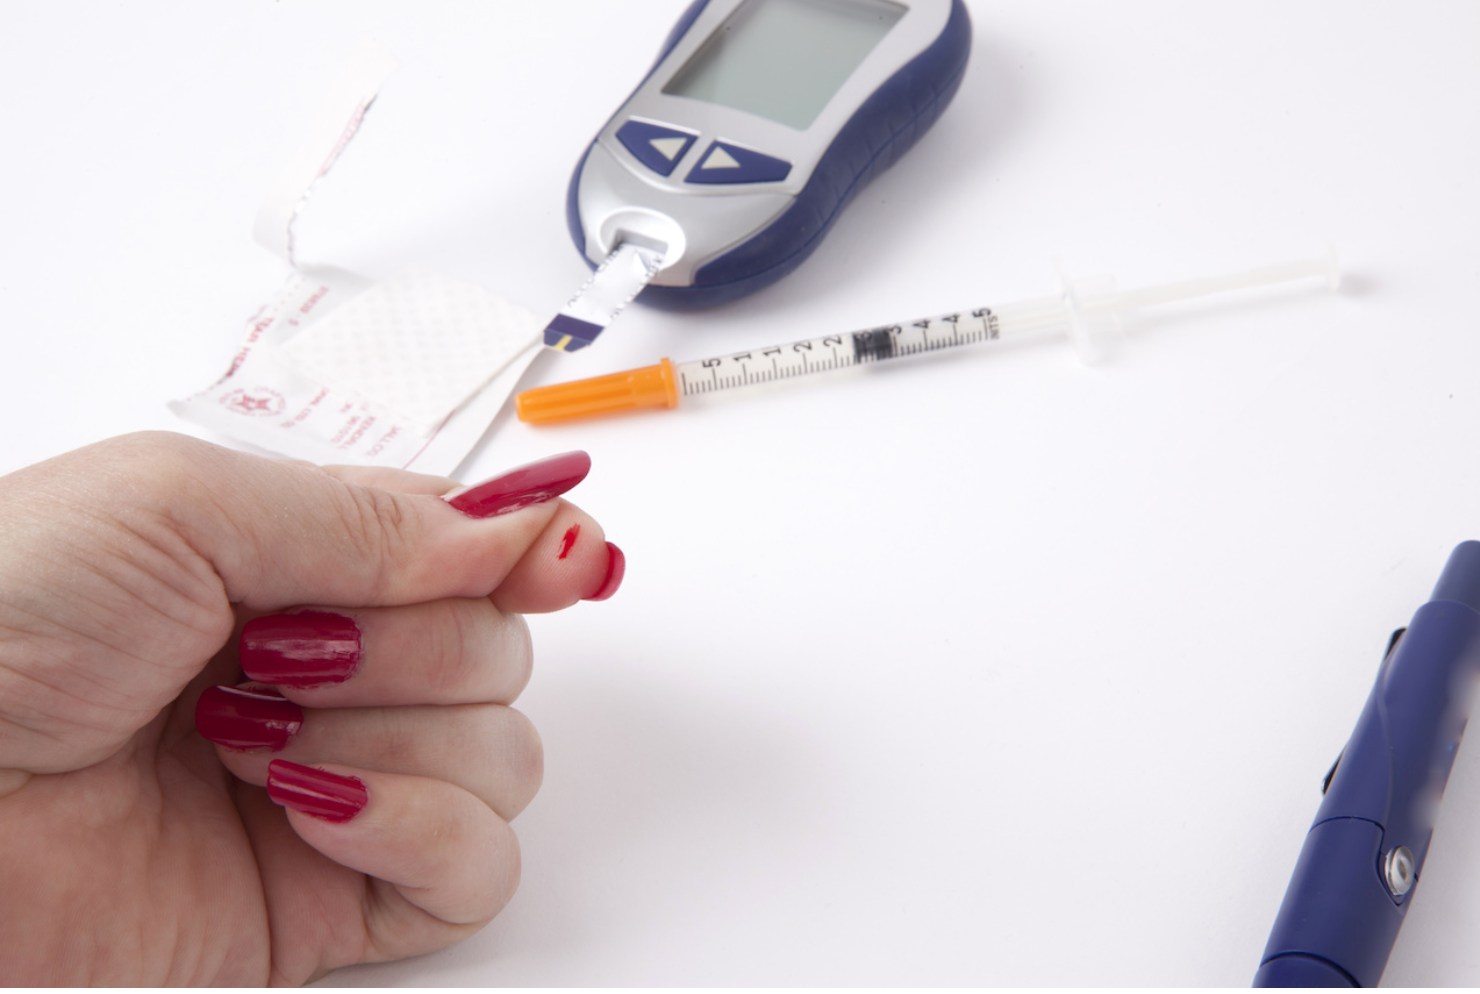 Blood Glucose Monitoring in Diabetes Care: When Innovation is Hidden In Plain Sight